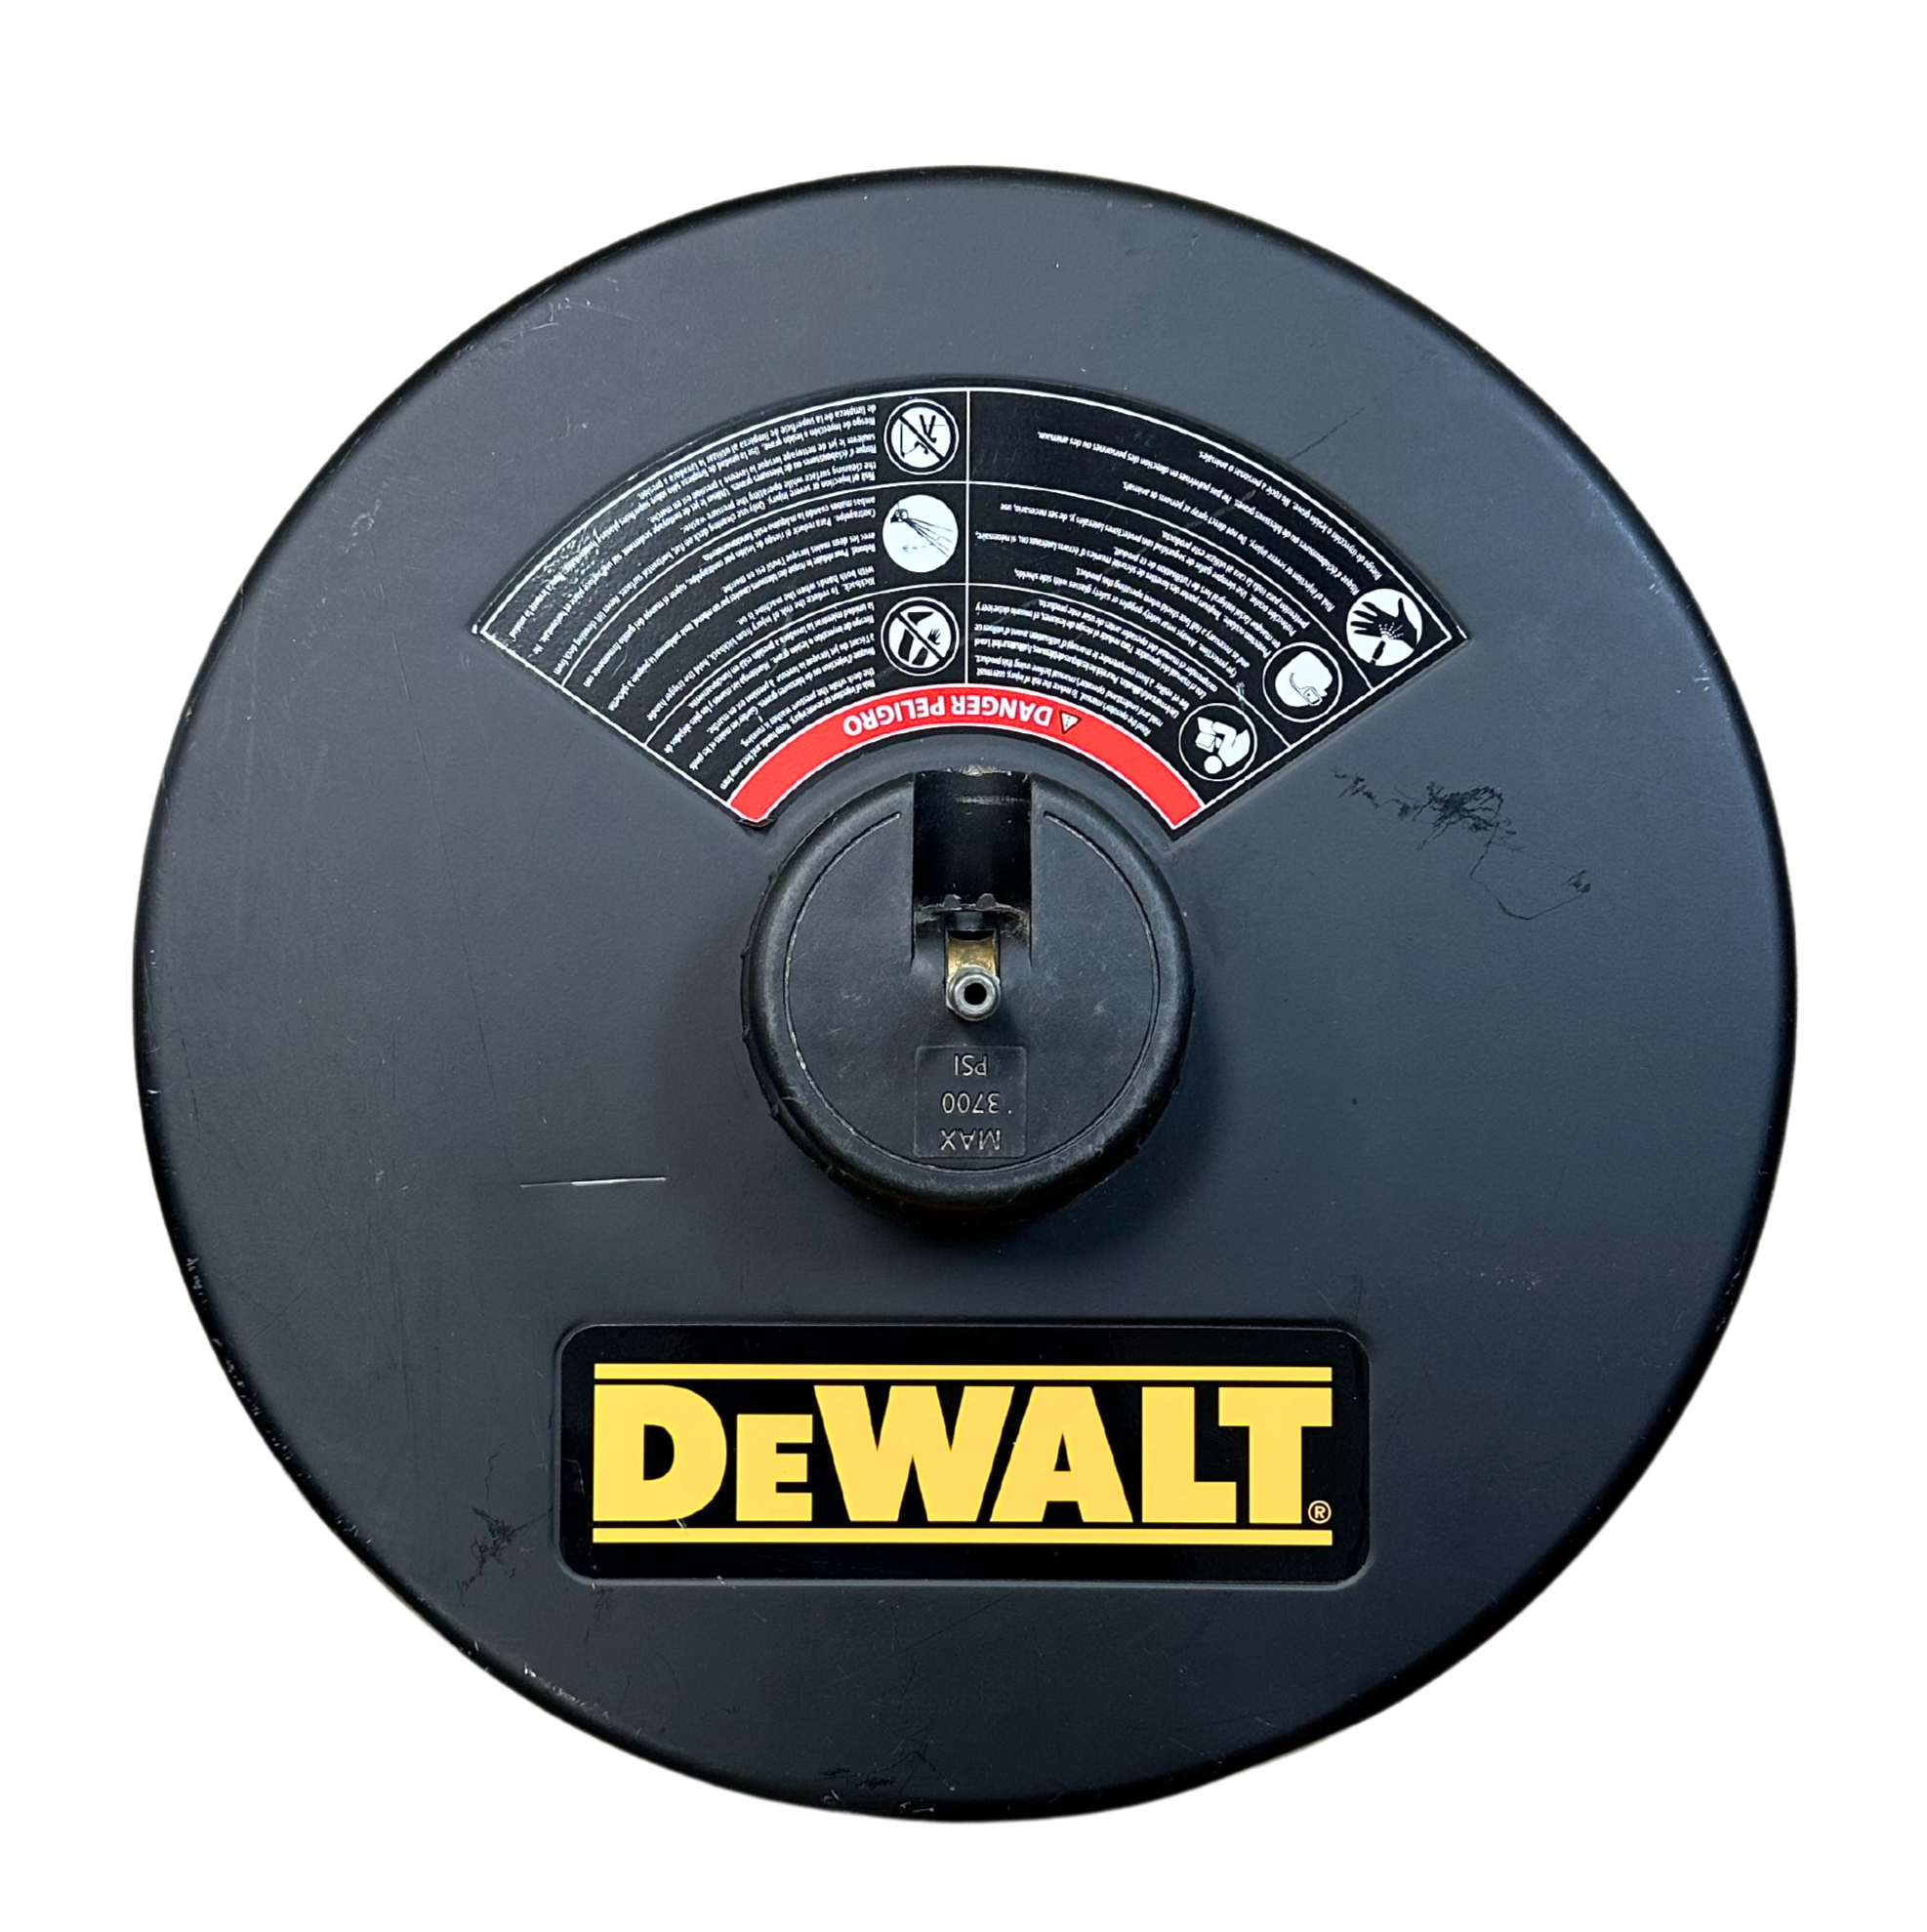 DEWALT Universal 18 in. Surface Cleaner for Cold Water Pressure Washers Rated up to 3700 PSI